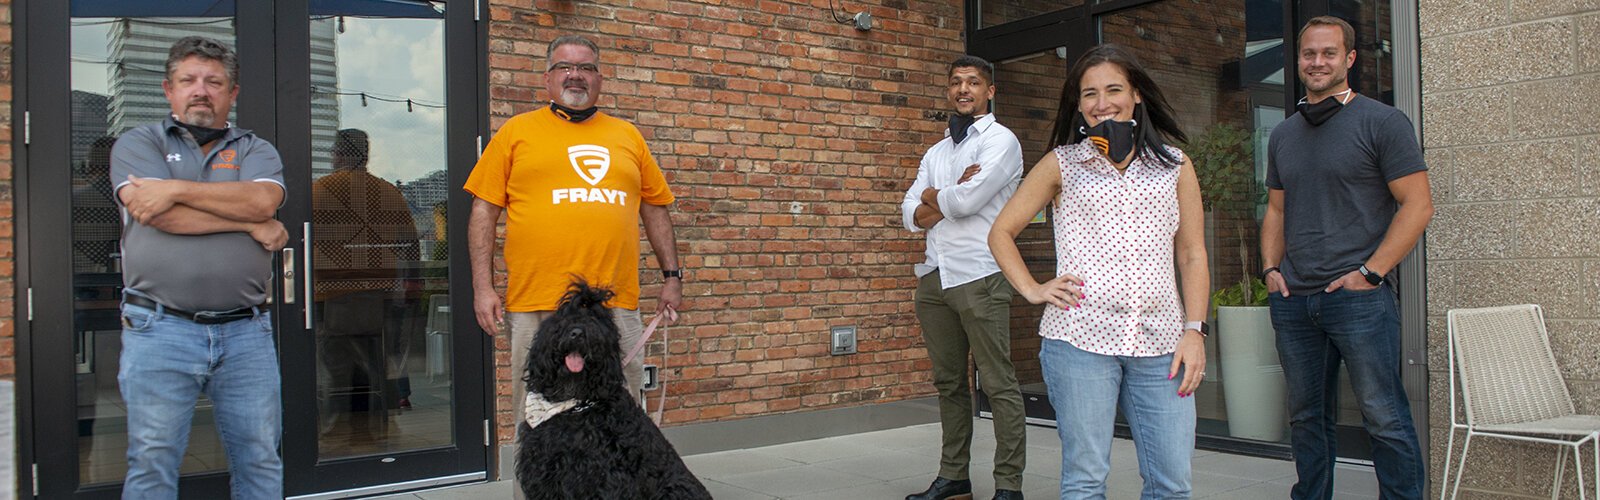 CEO of Frayt, Lawrence MCord with his dog, Yana, and coworkers Dave Anderson, Marek Haile, Olivia Overton, and Ben Klinger.